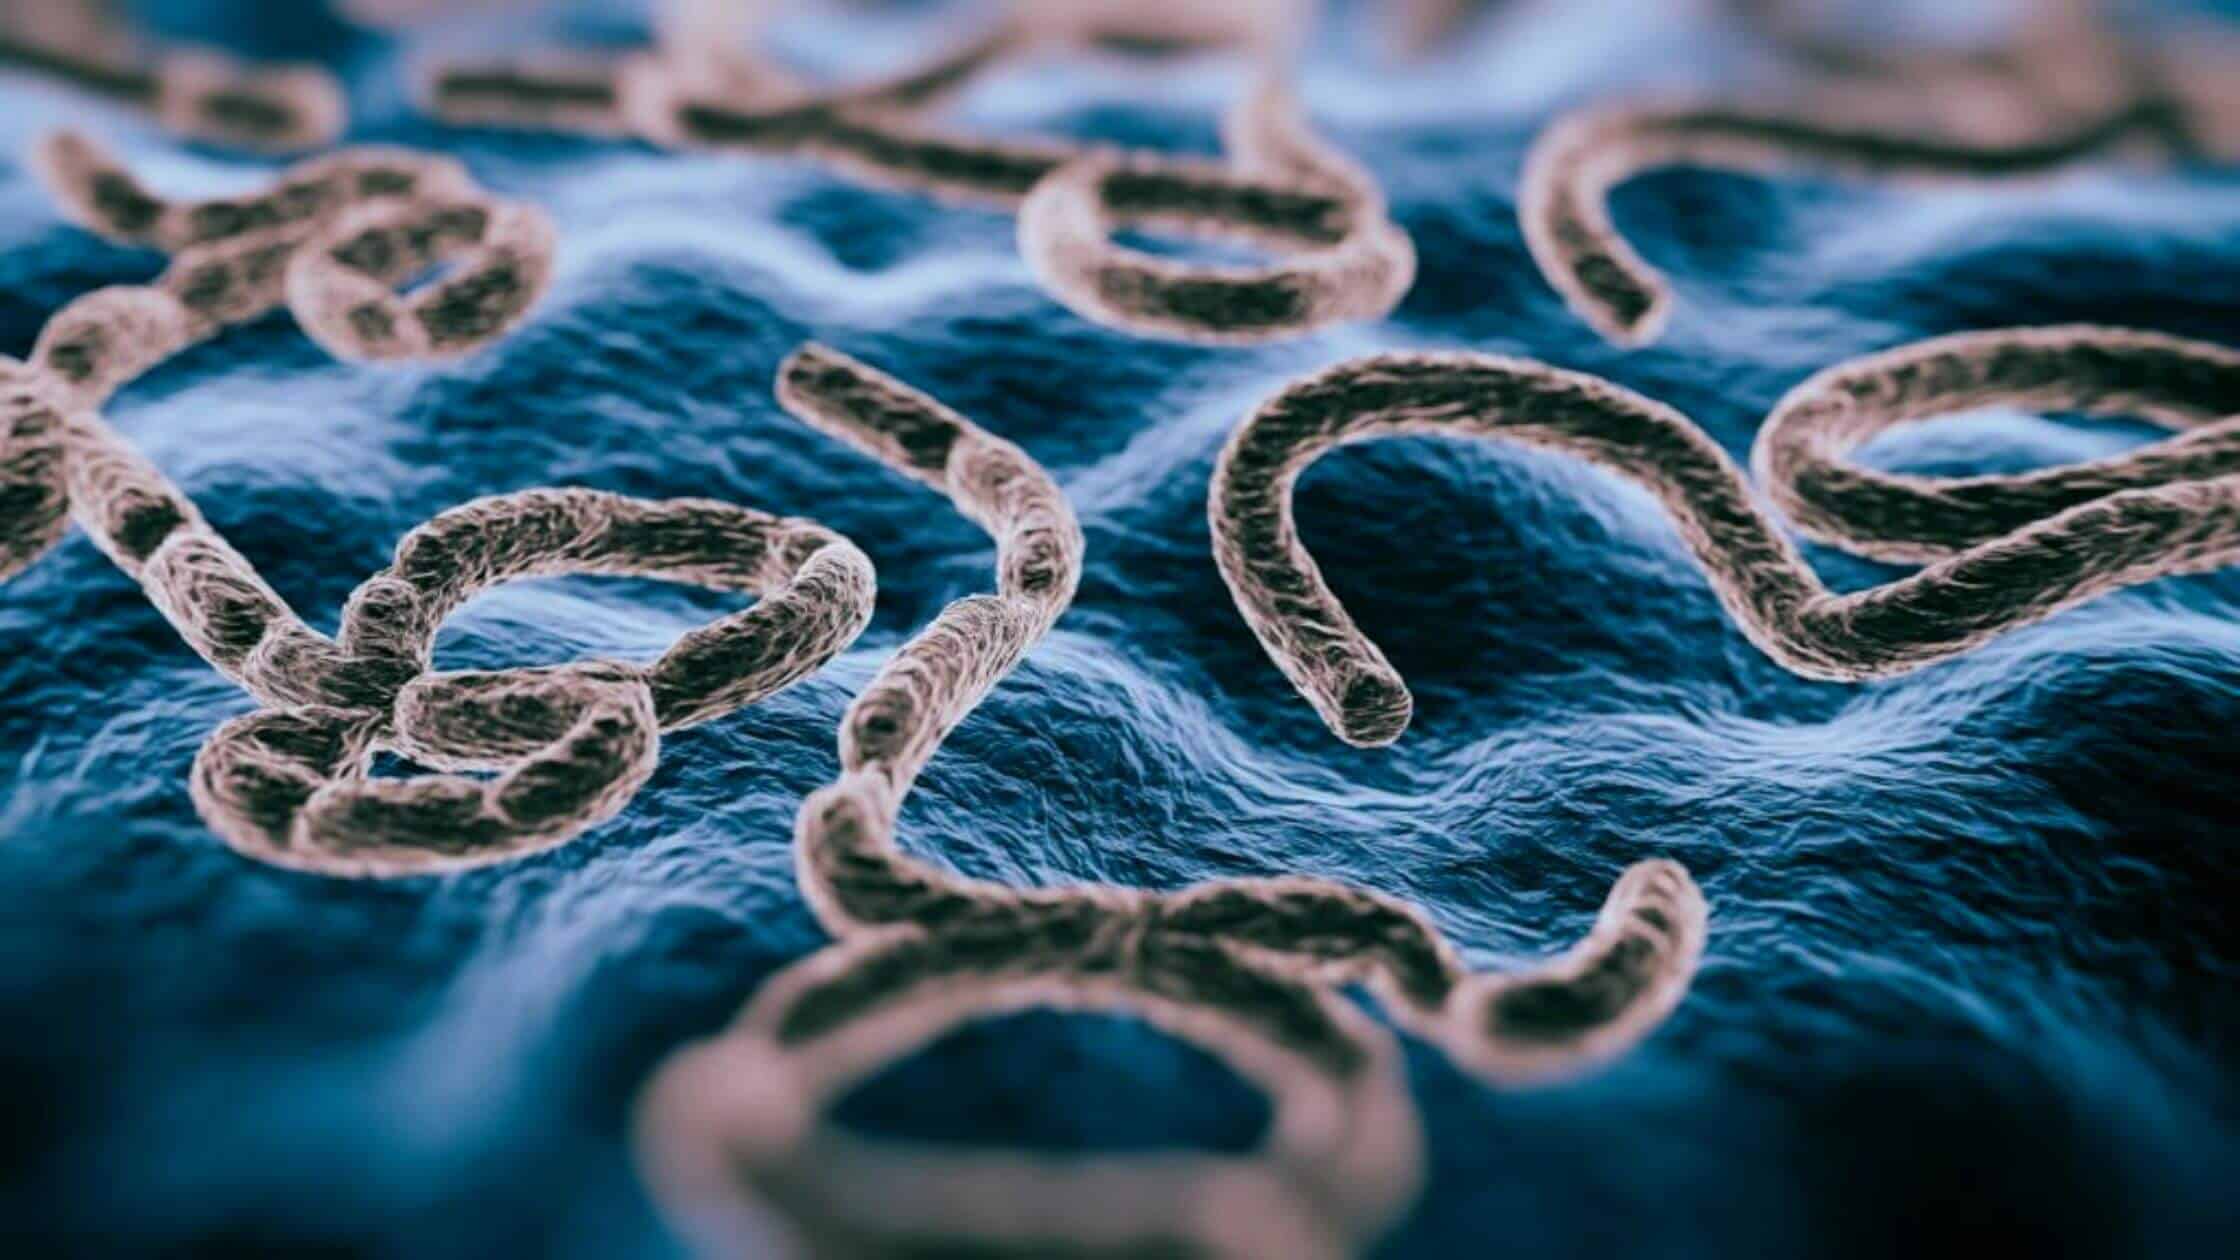 Scientists Warn About A New Monkey-Born Virus With Ebola-Like Symptoms Can Affect Humans